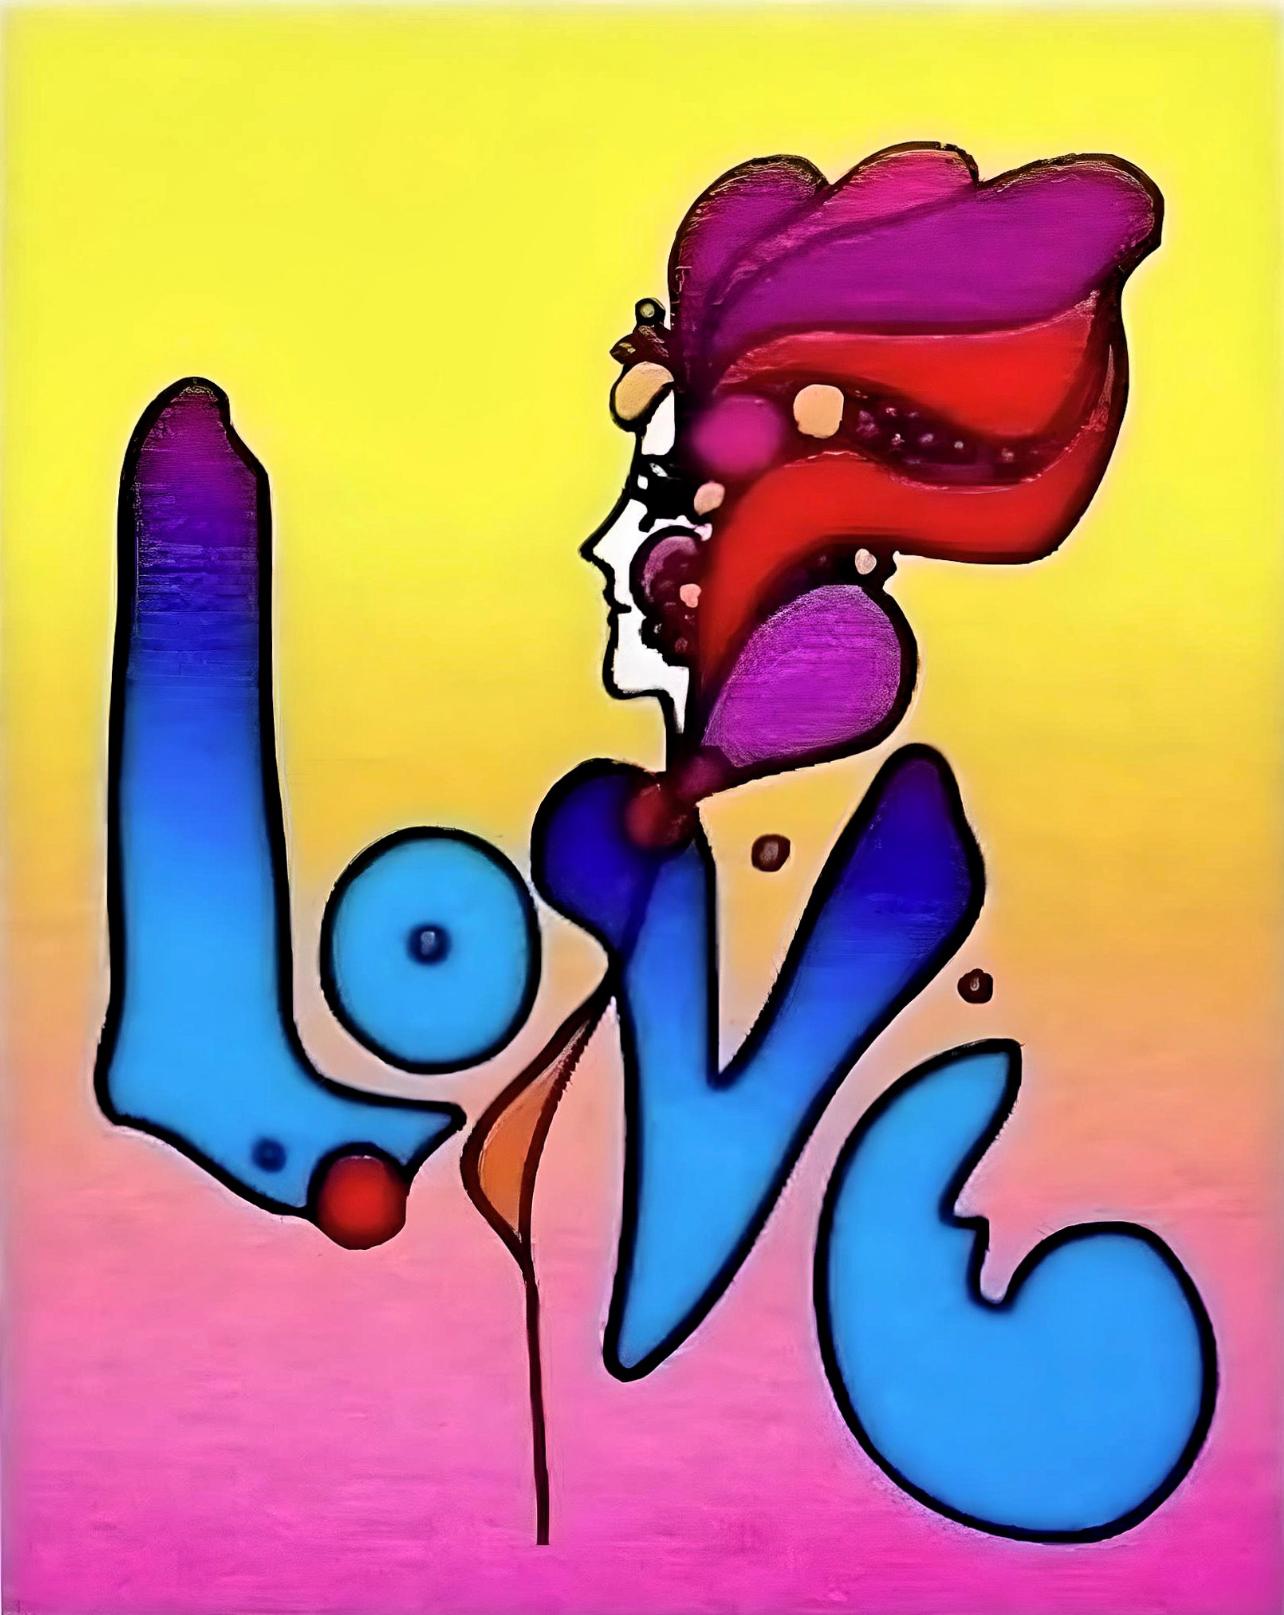 Artist: Peter Max (1937)
Title: Love I
Year: 2001
Edition: 453/500, plus proofs
Medium: Lithograph on Lustro Saxony paper
Size: 6 x 5 inches
Condition: Excellent
Inscription: Signed and numbered by the artist.
Notes: Published by Via Max.

PETER MAX